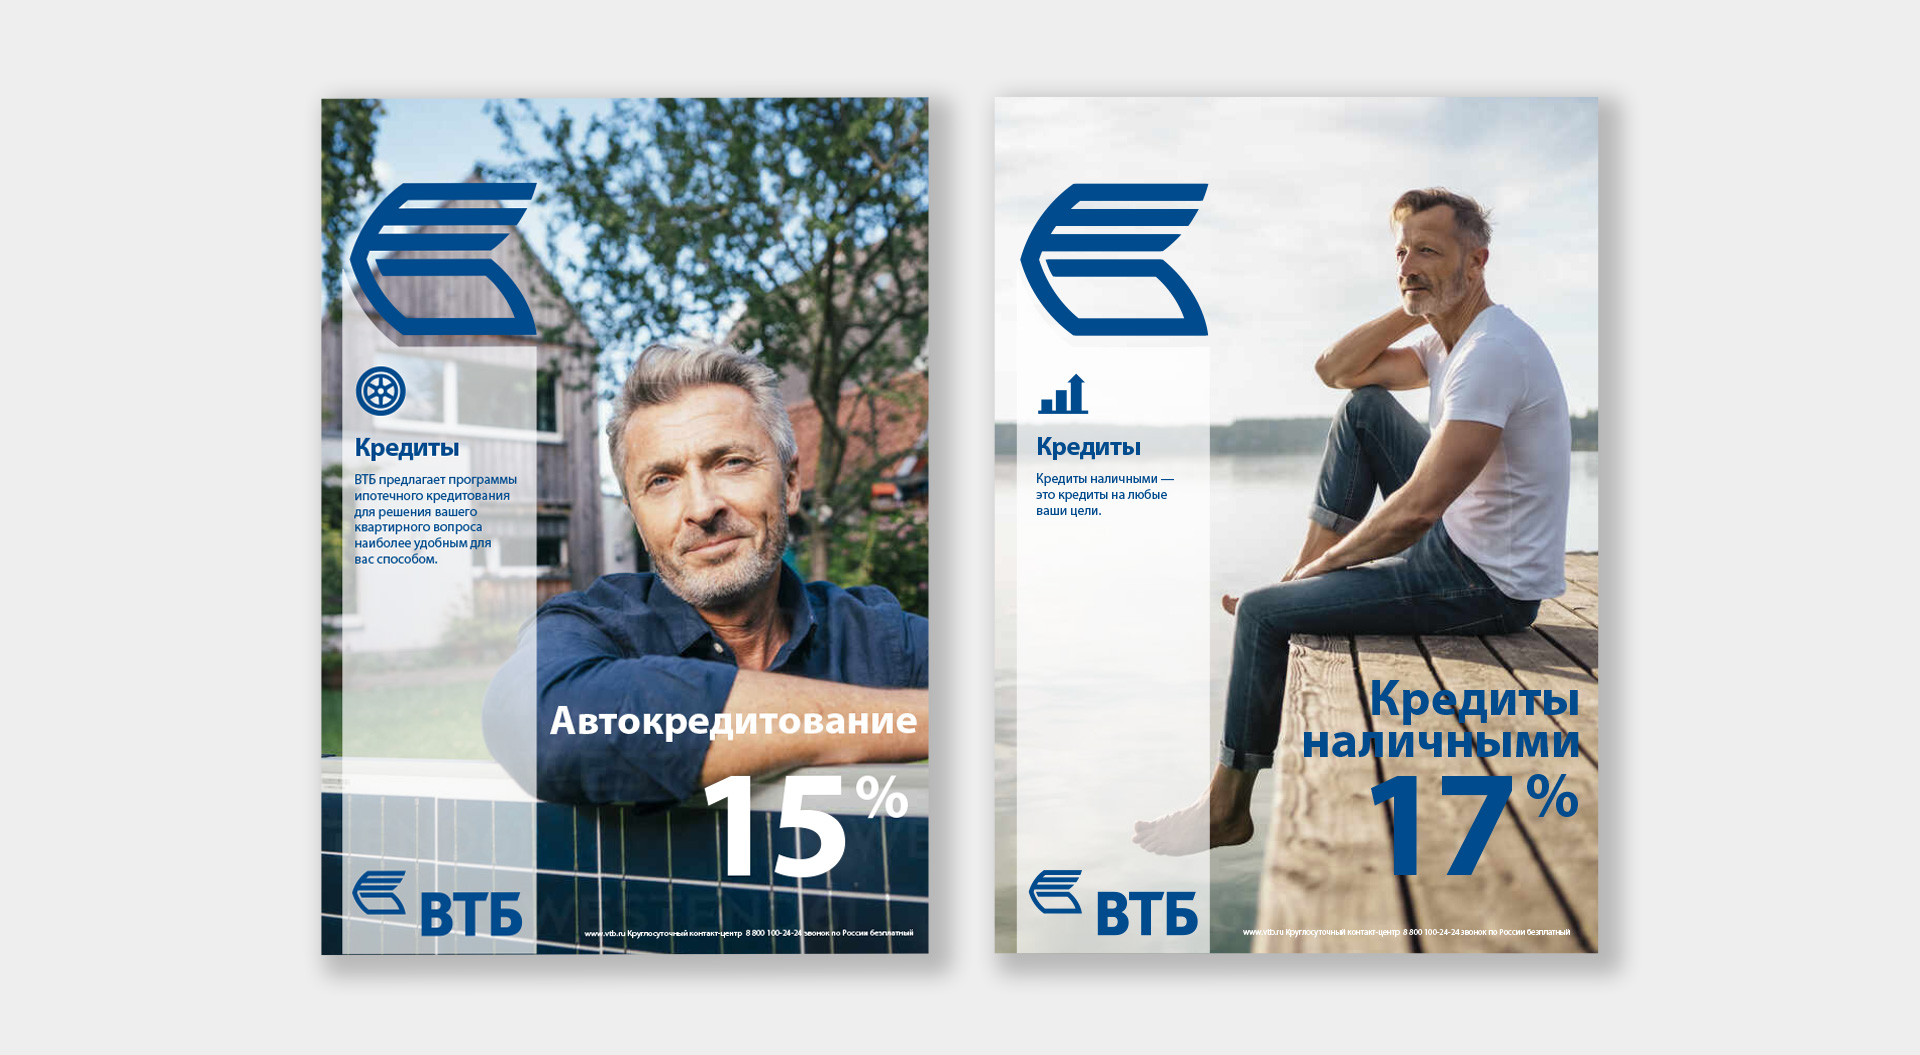 VTB Bank express branch and advertising communications motor vehicle finance and cash loan posters